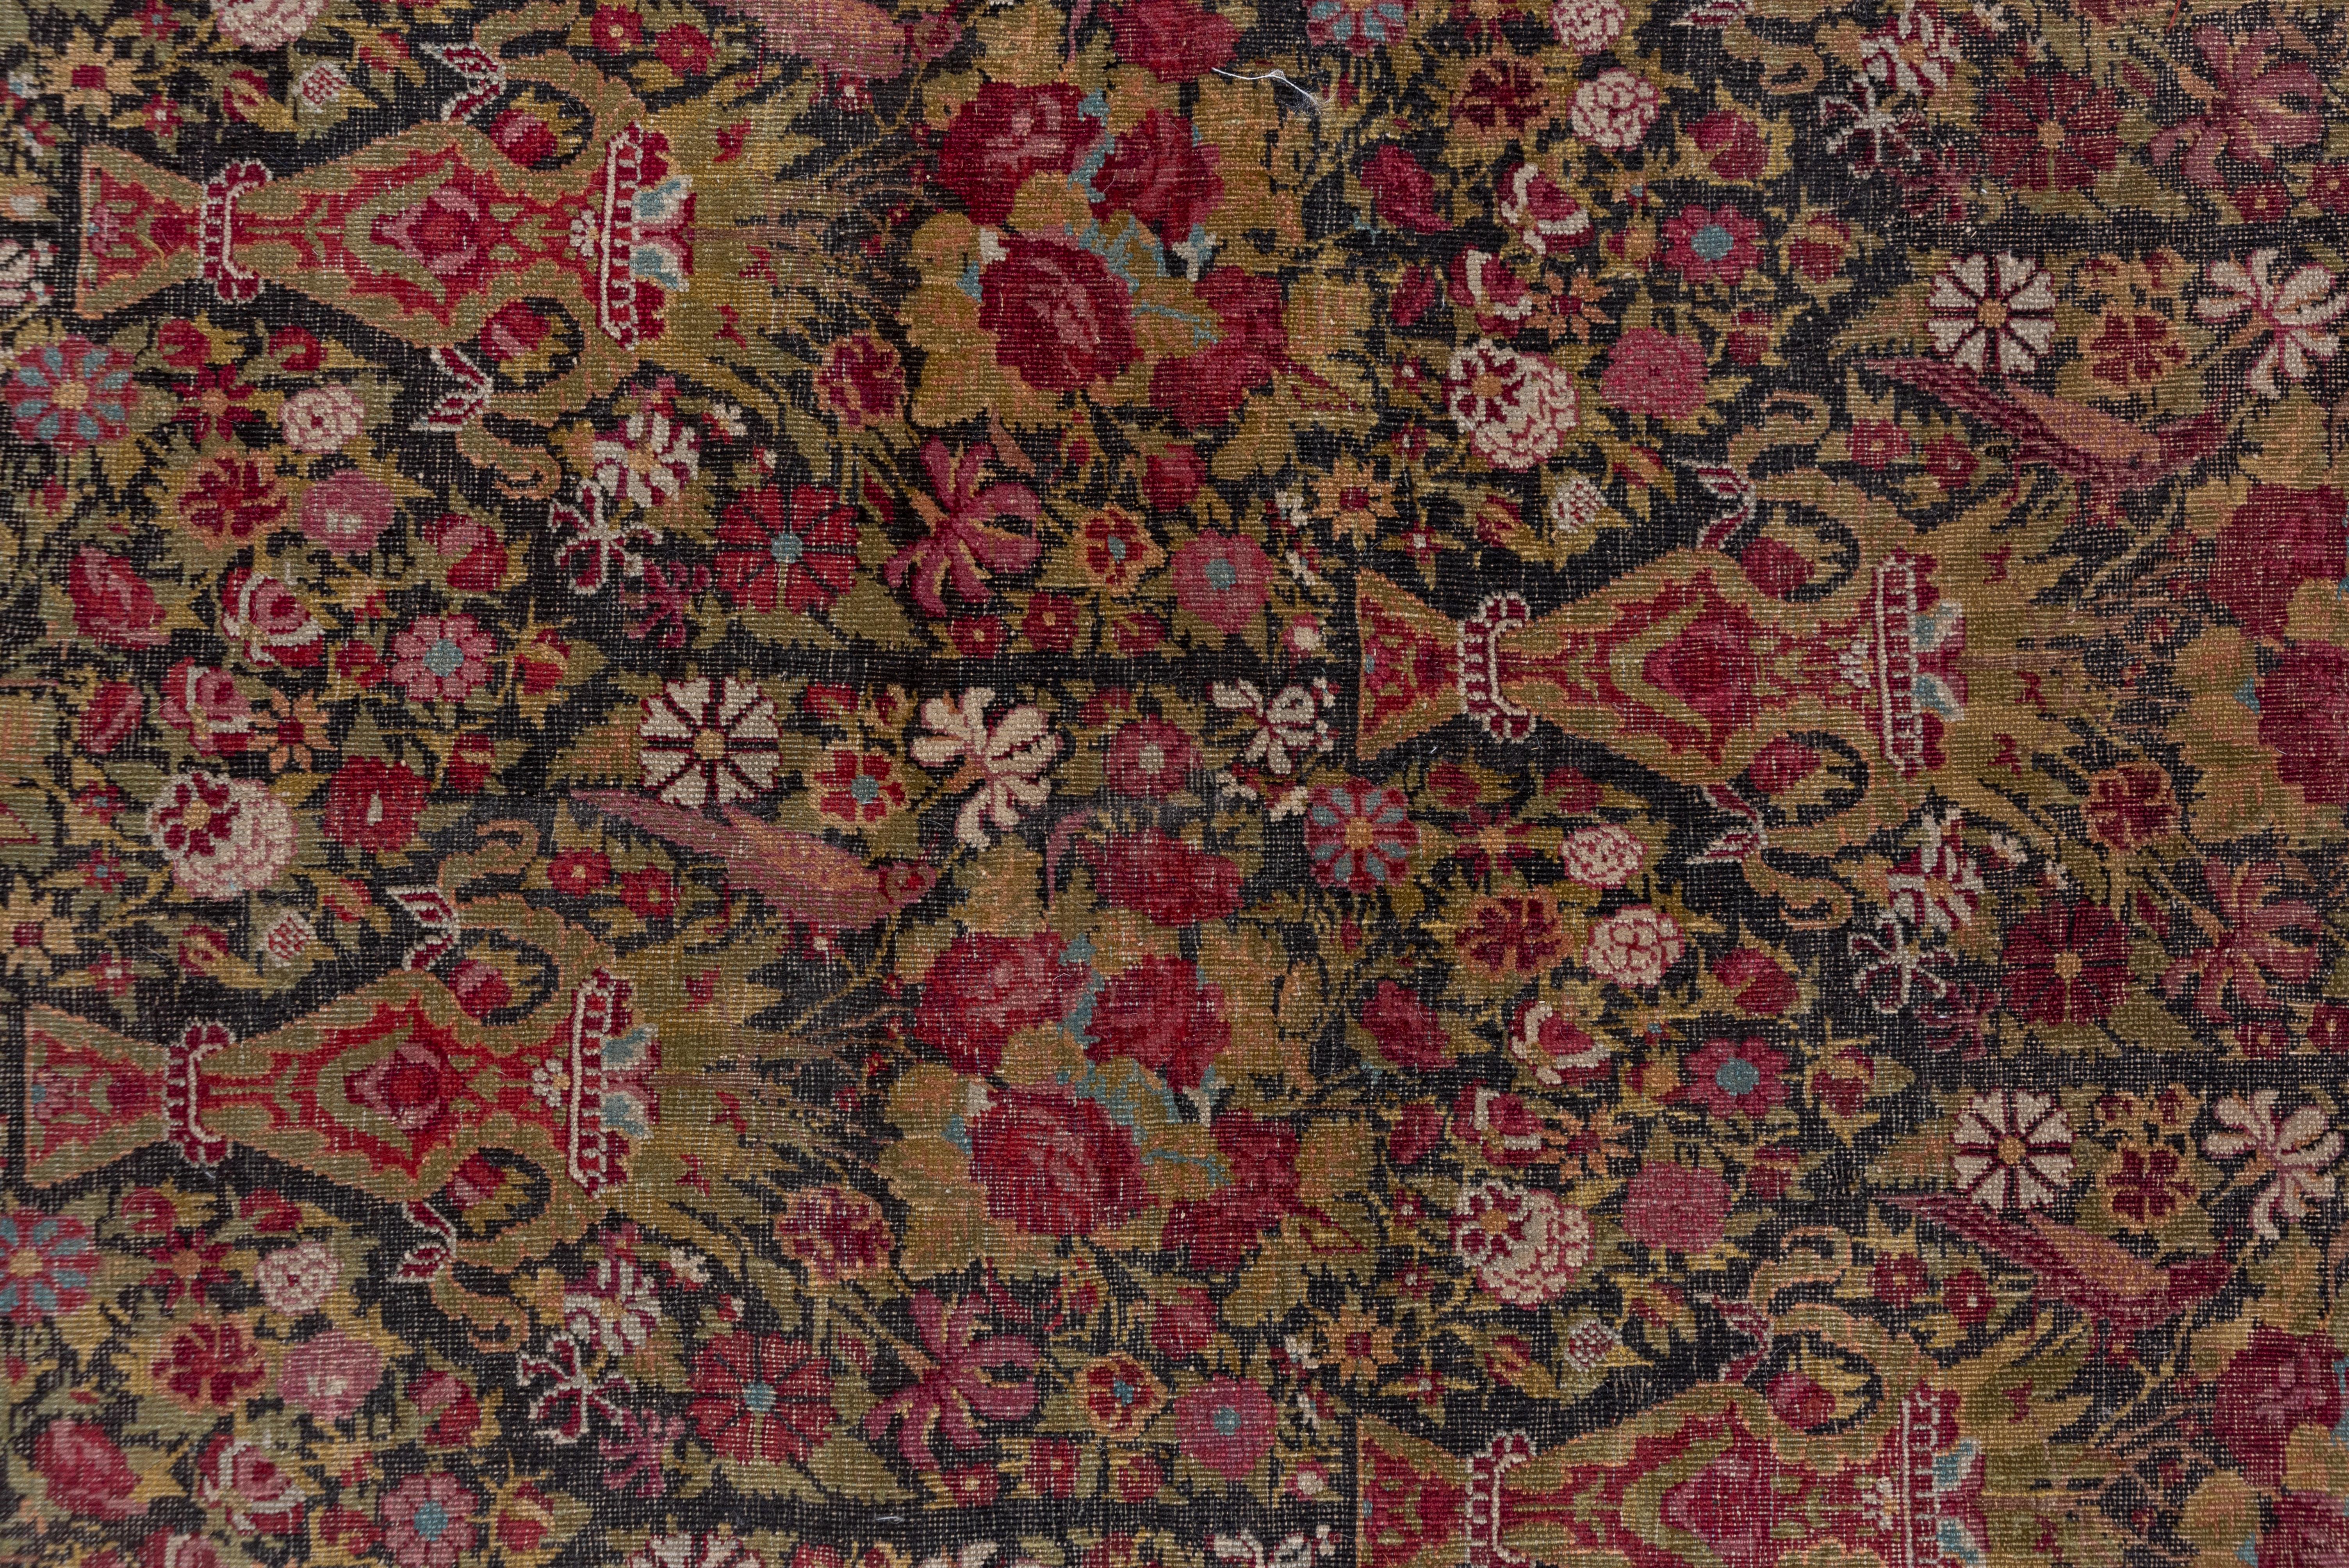 Wool Finely Woven Antique Indian Agra Rug, Vase Design Field, Wine & Chartreuse Tones For Sale